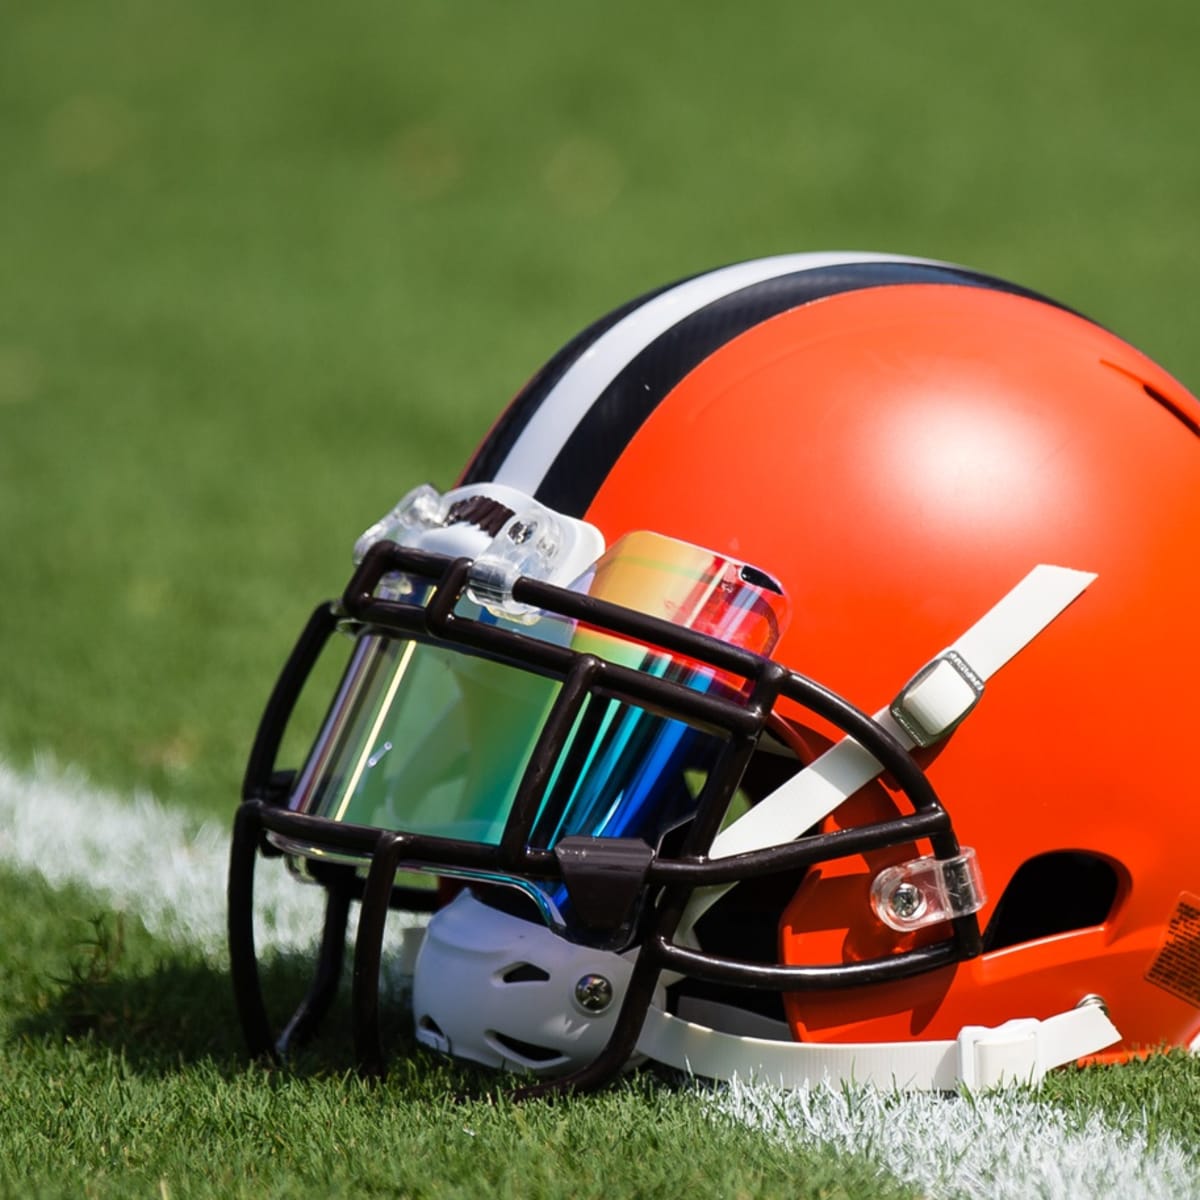 Do the Browns need to trade up to get a receiver? Browns 2022 NFL Draft  final 7-round mock 